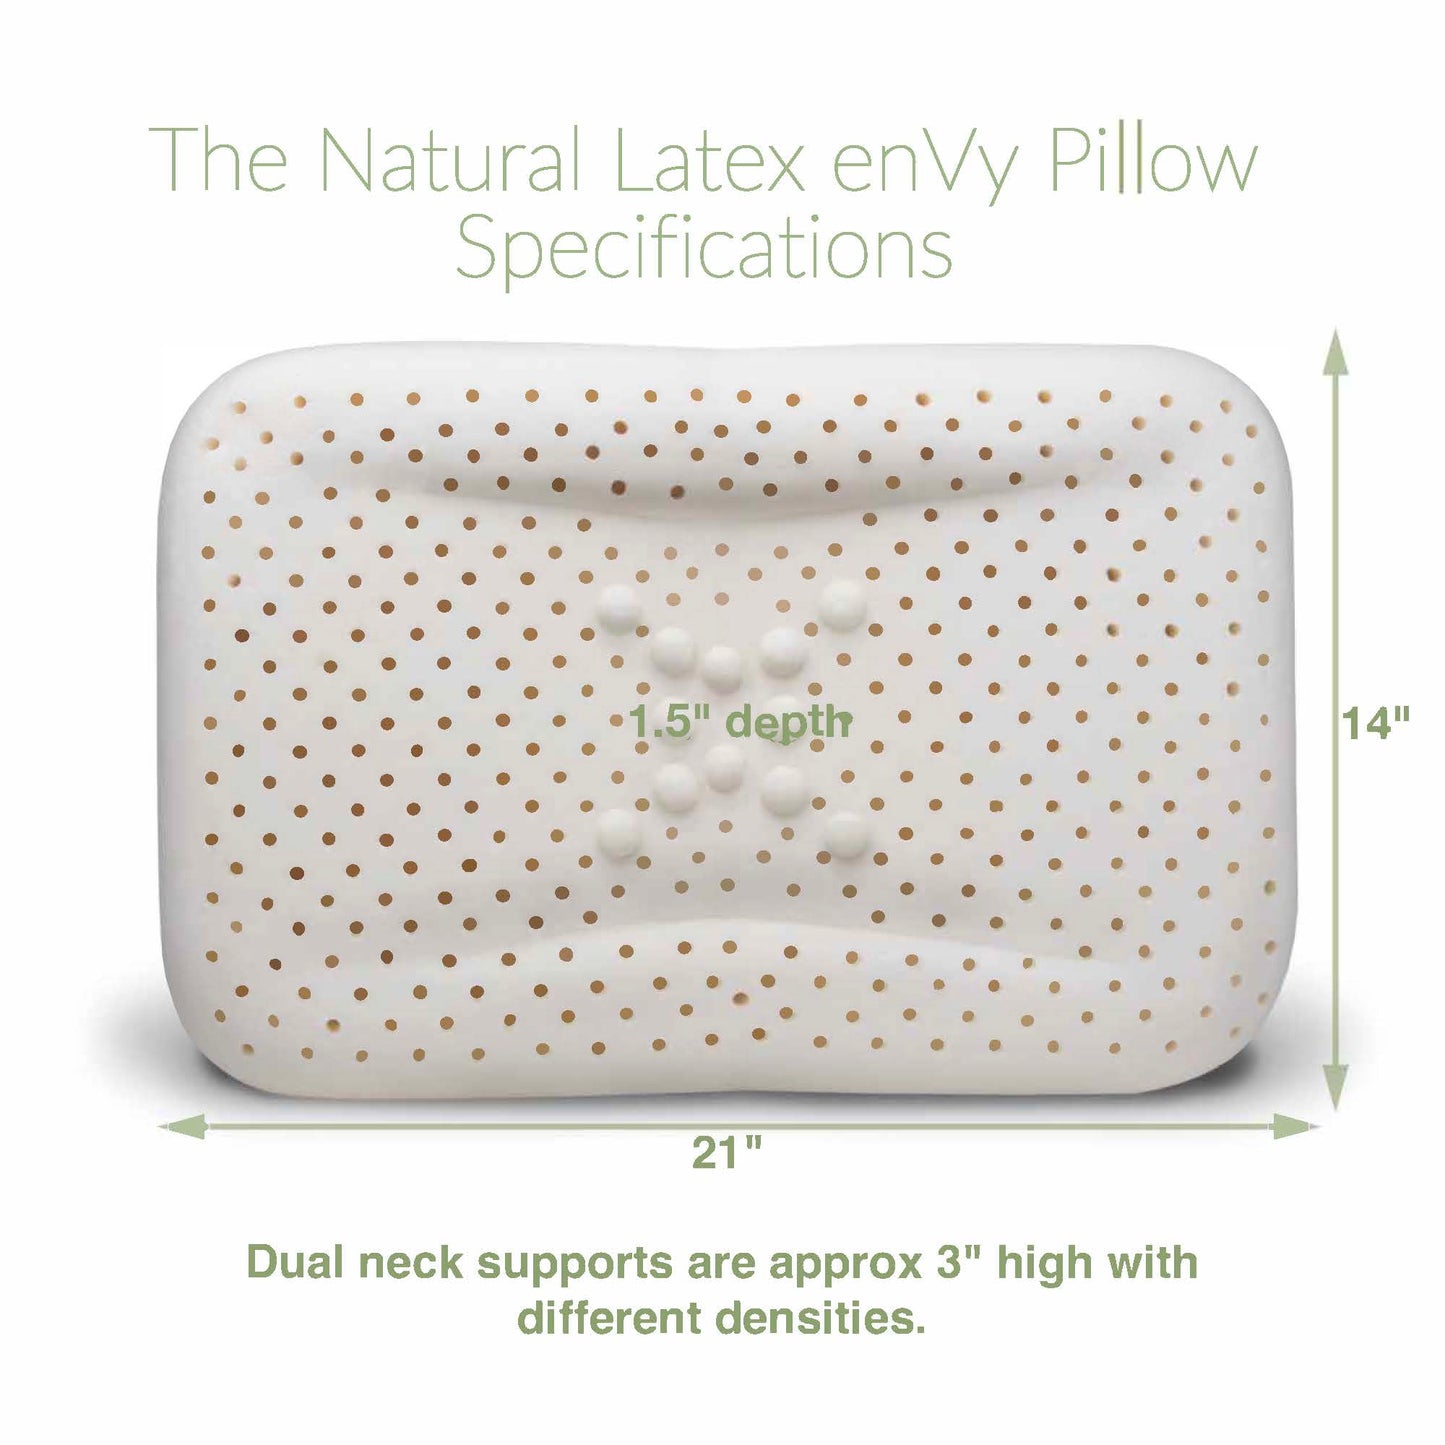 The ReNEW™ enVy® COPPER + TENCEL™ Anti-Aging Pillow - 100% Natural Latex Pillow with COPPER-infused TENCEL™ Pillowcase